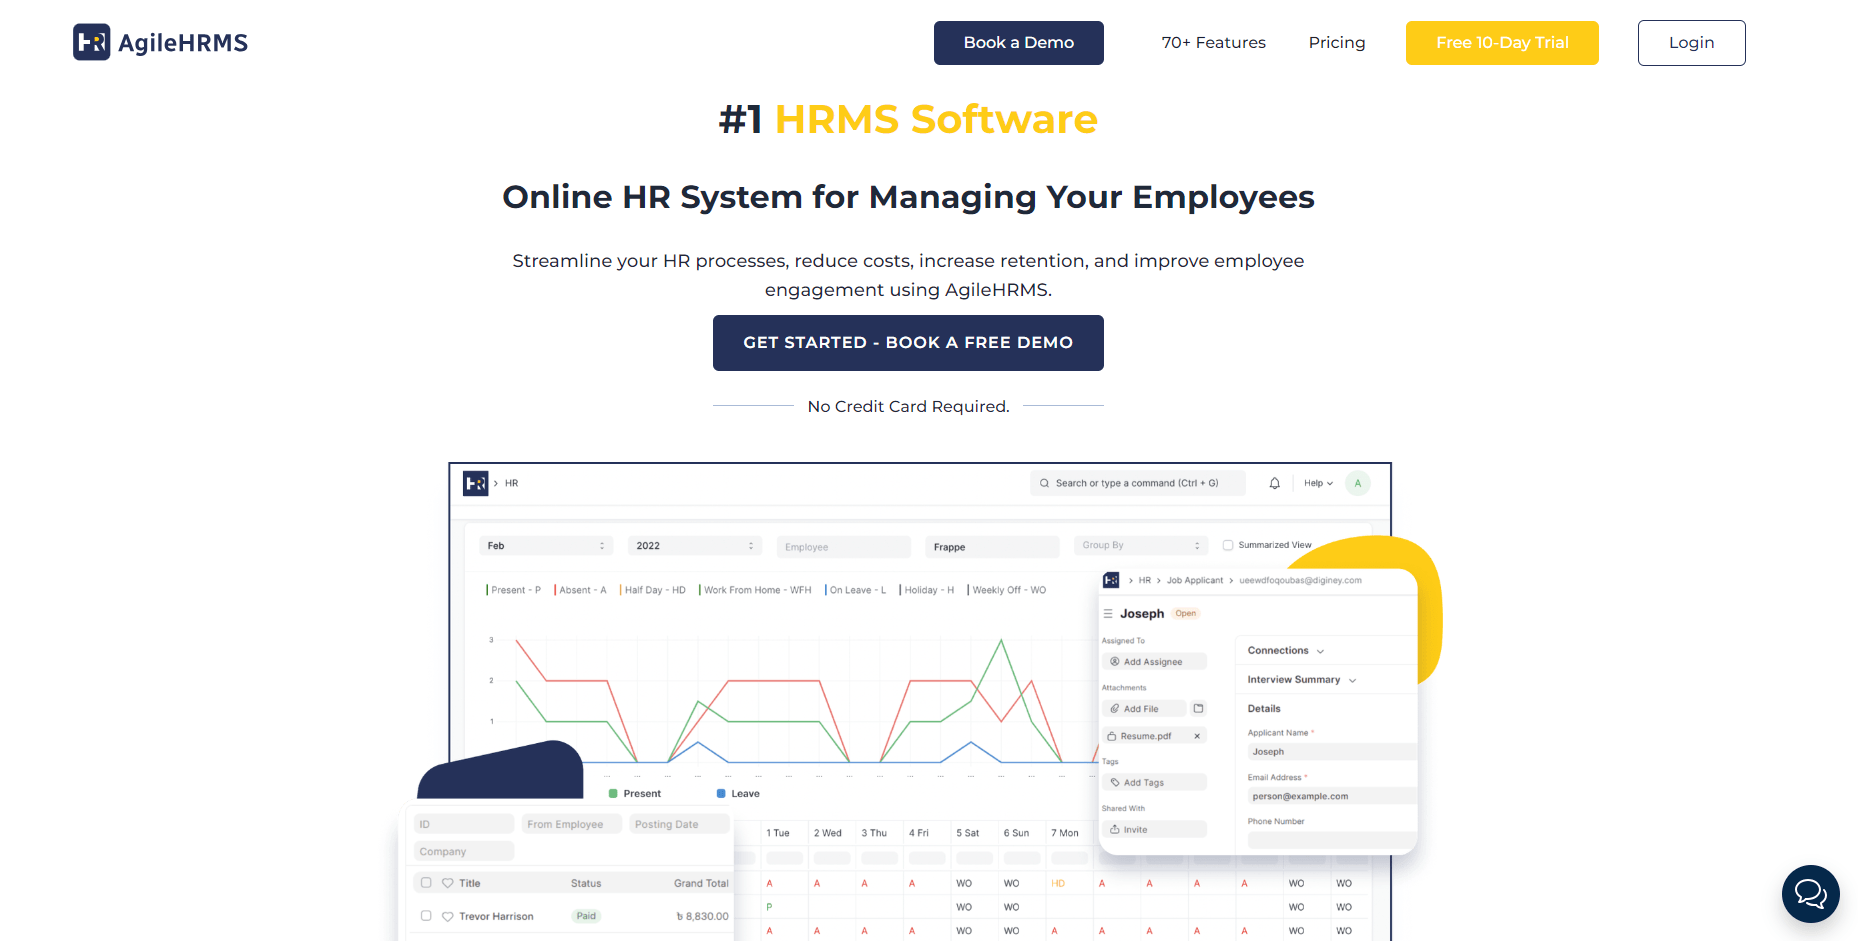 Homepage of AgileHRMS, with texts mentioning Online HR system for managing your employees, along with few screenshots of the HR system